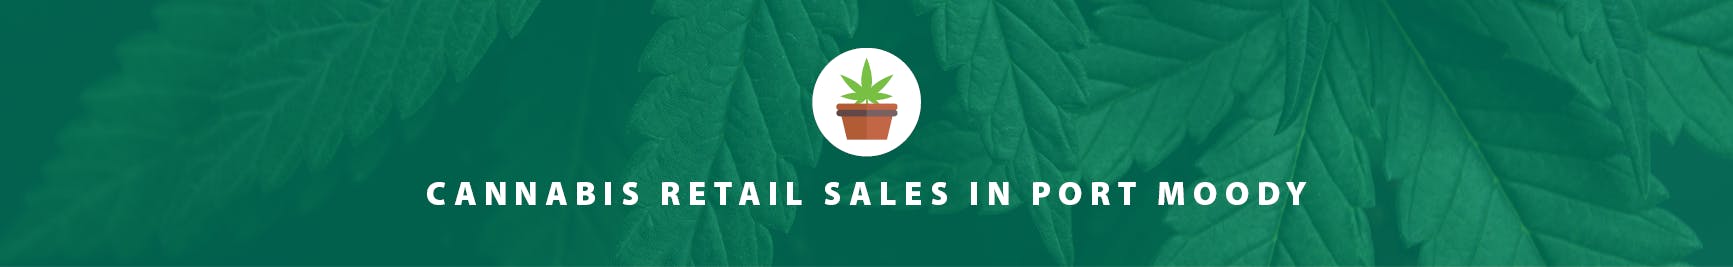 cannabis retail sales project banner